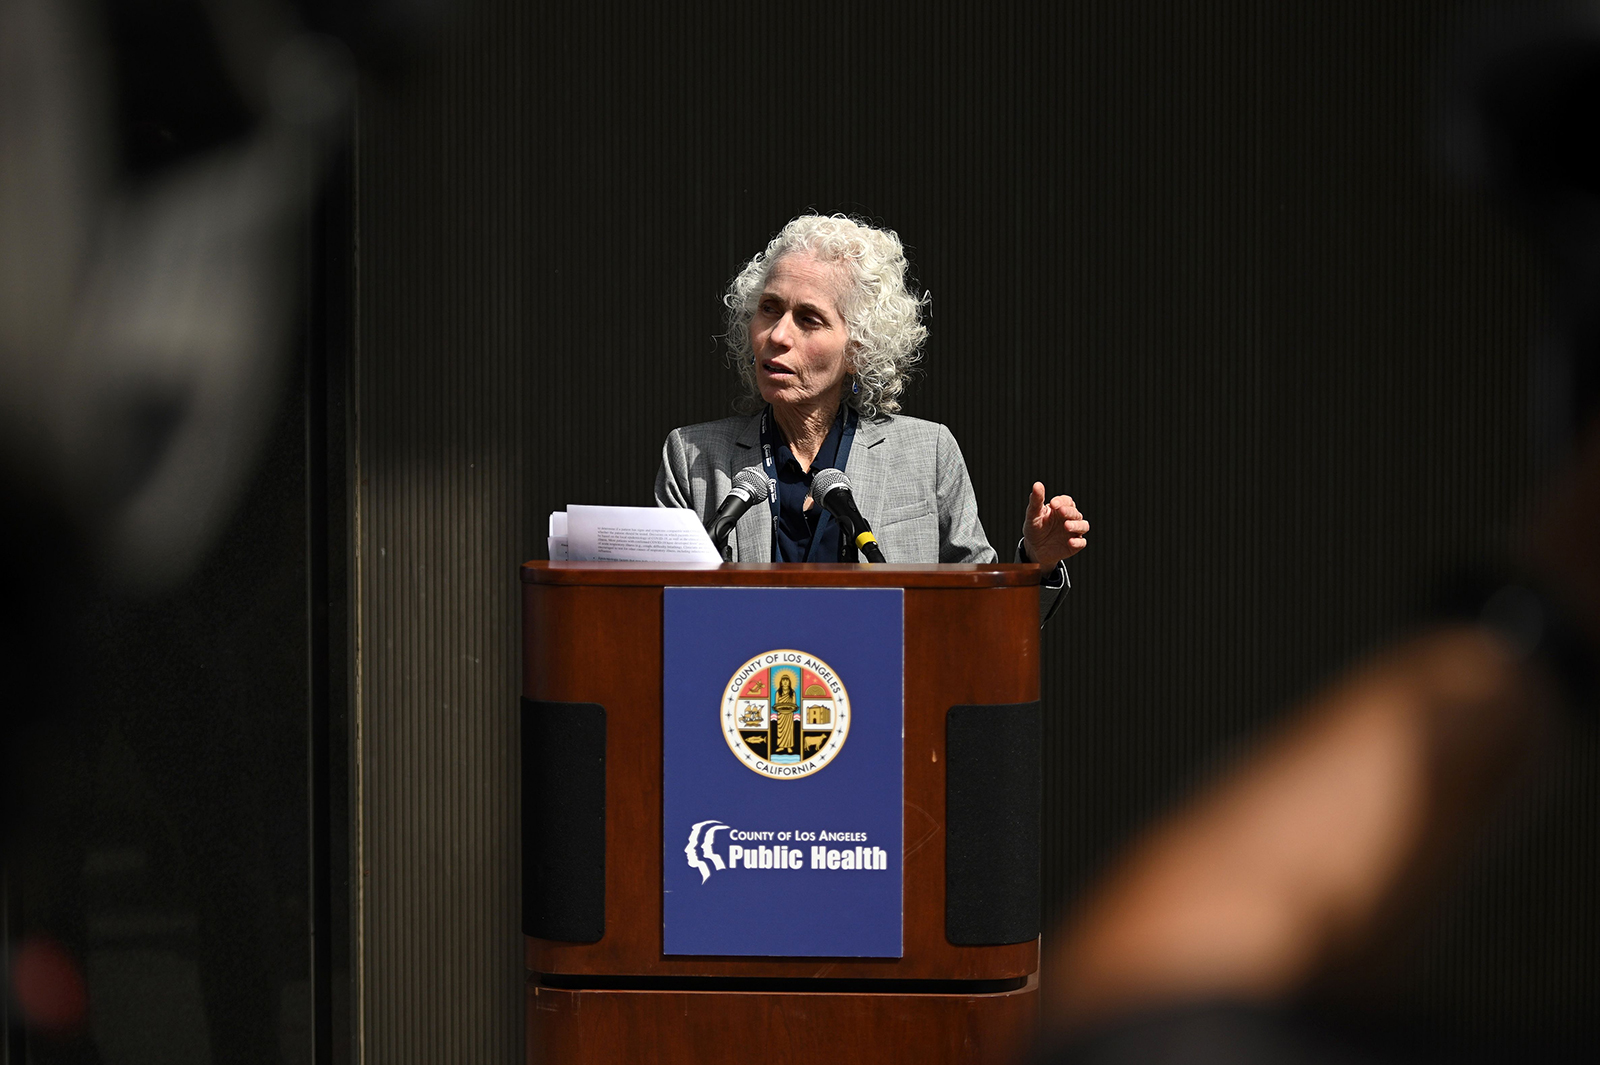 Los Angeles County Public Health director Barbara Ferrer speaks at a press conference on Covid-19 in Los Angeles, on March 6.